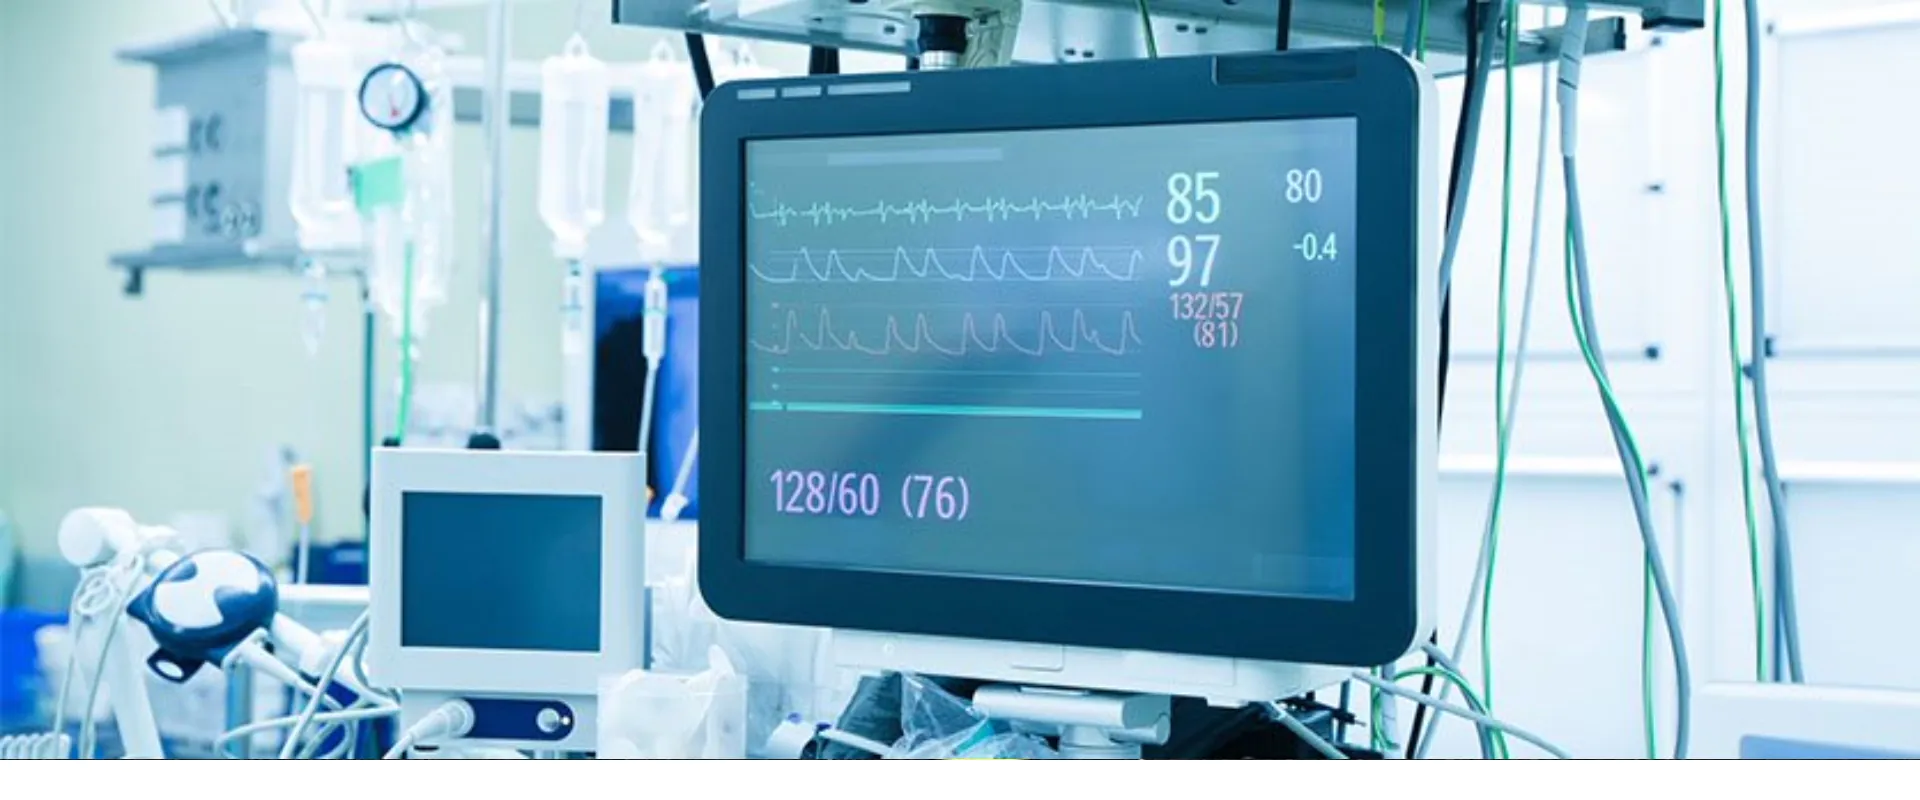 Market Assessment Study Enables a Patient Monitoring Systems Manufacturer to Spur Revenues and Identify Potential Opportunities